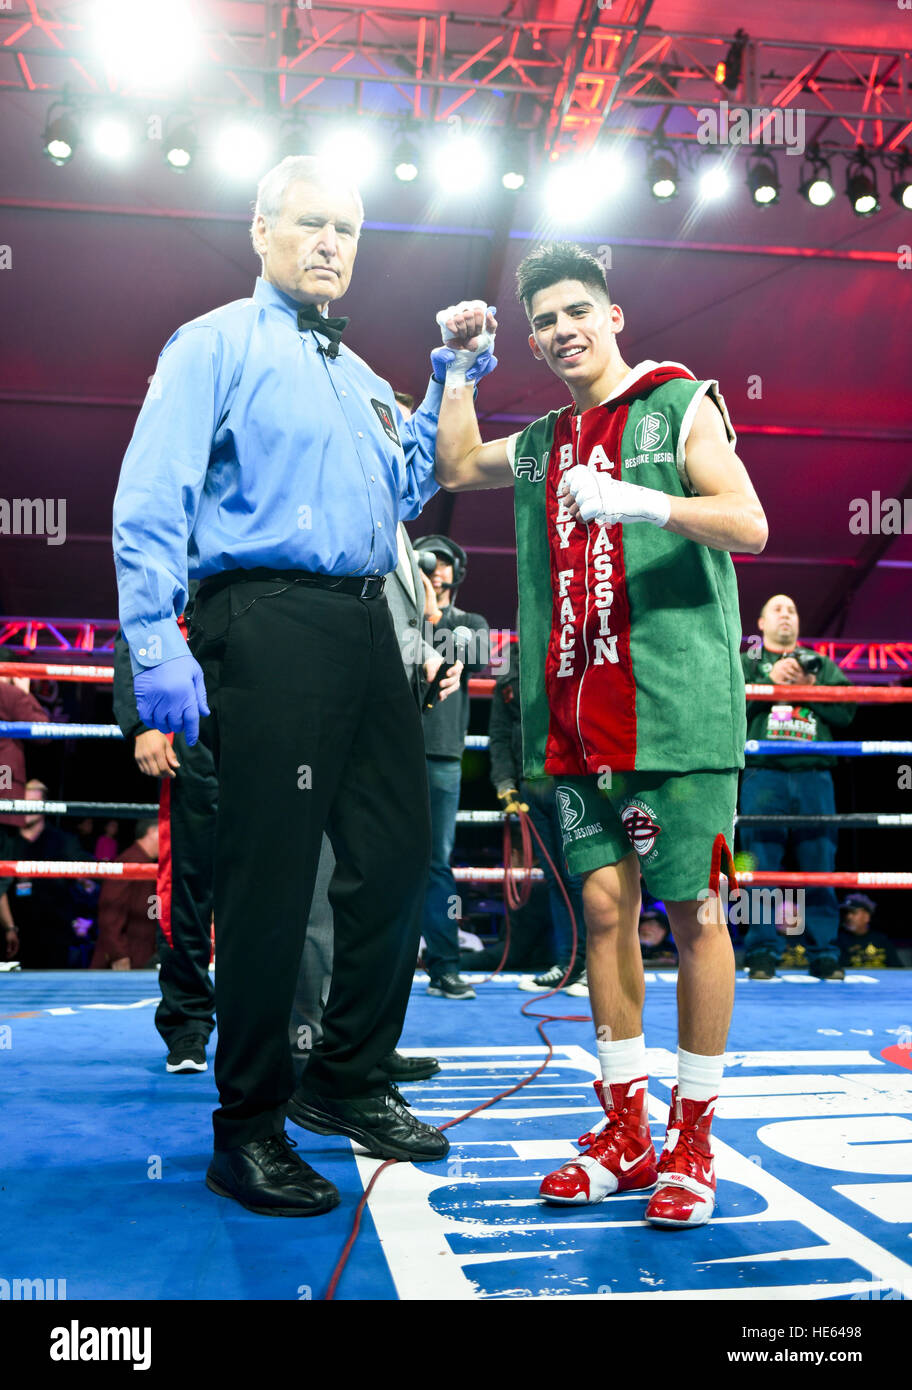 Las Vegas, Nevada, USA. 17th December, 2016. Max Ornelas wins a four round bantamweight bout against Jorge Parez at “Knockout Night at the D”  presented by the D Las Vegas and DLVEC and promoted by Roy Jones Jr. Boxing. Credit: Ken Howard/Alamy Live News Stock Photo